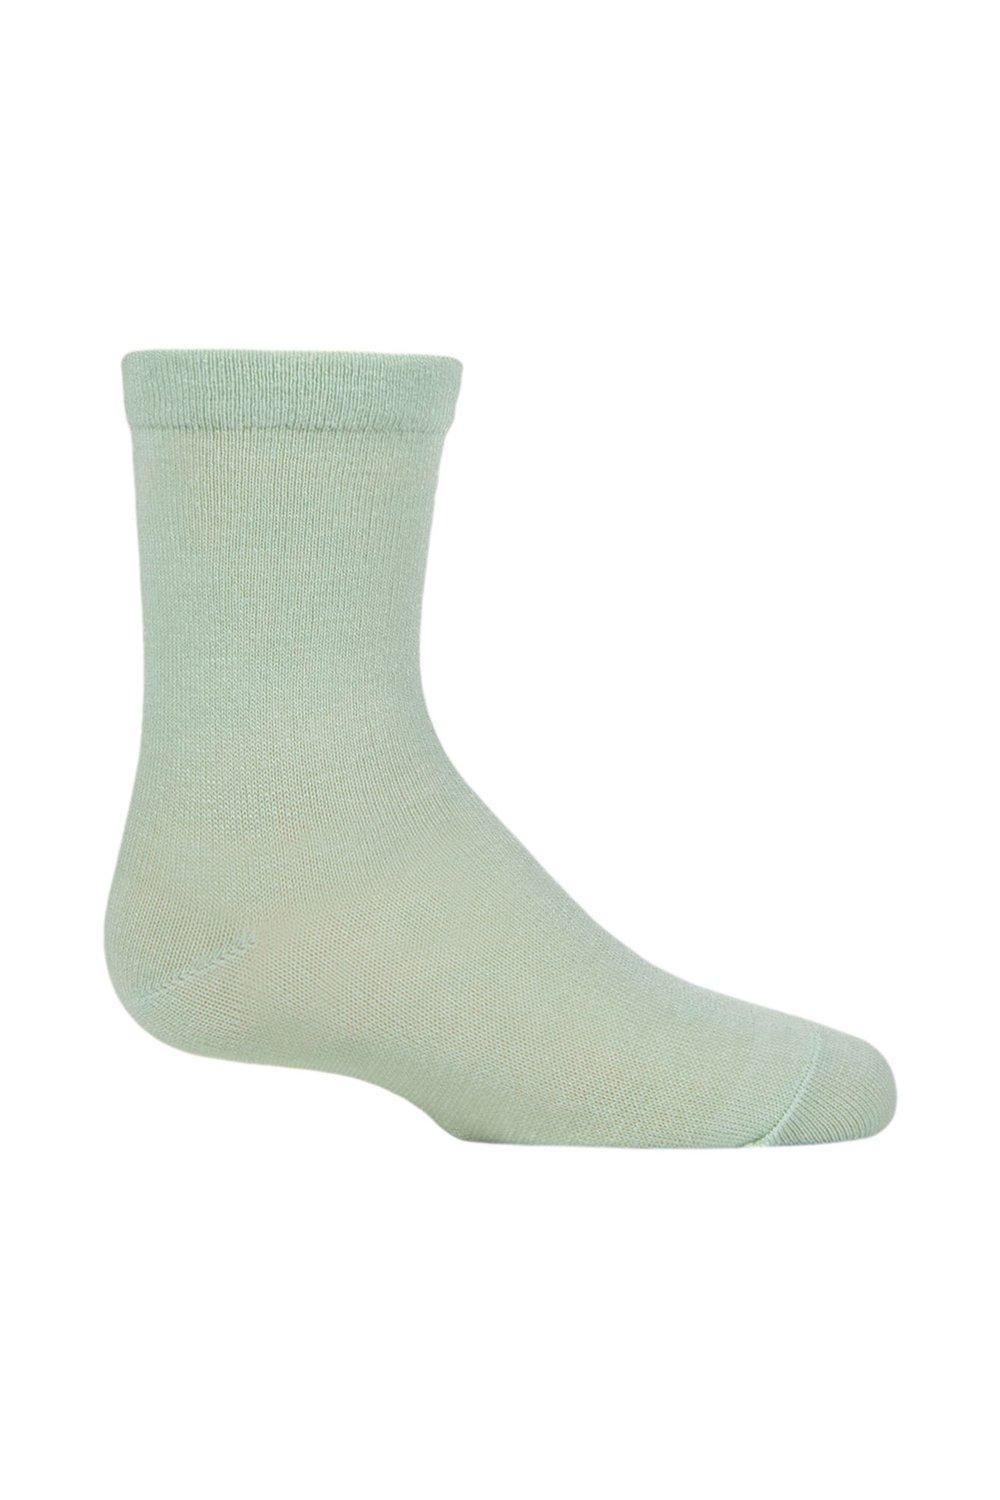 1 Pair Plain Bamboo Socks with Comfort Cuff and Smooth Toe Seams